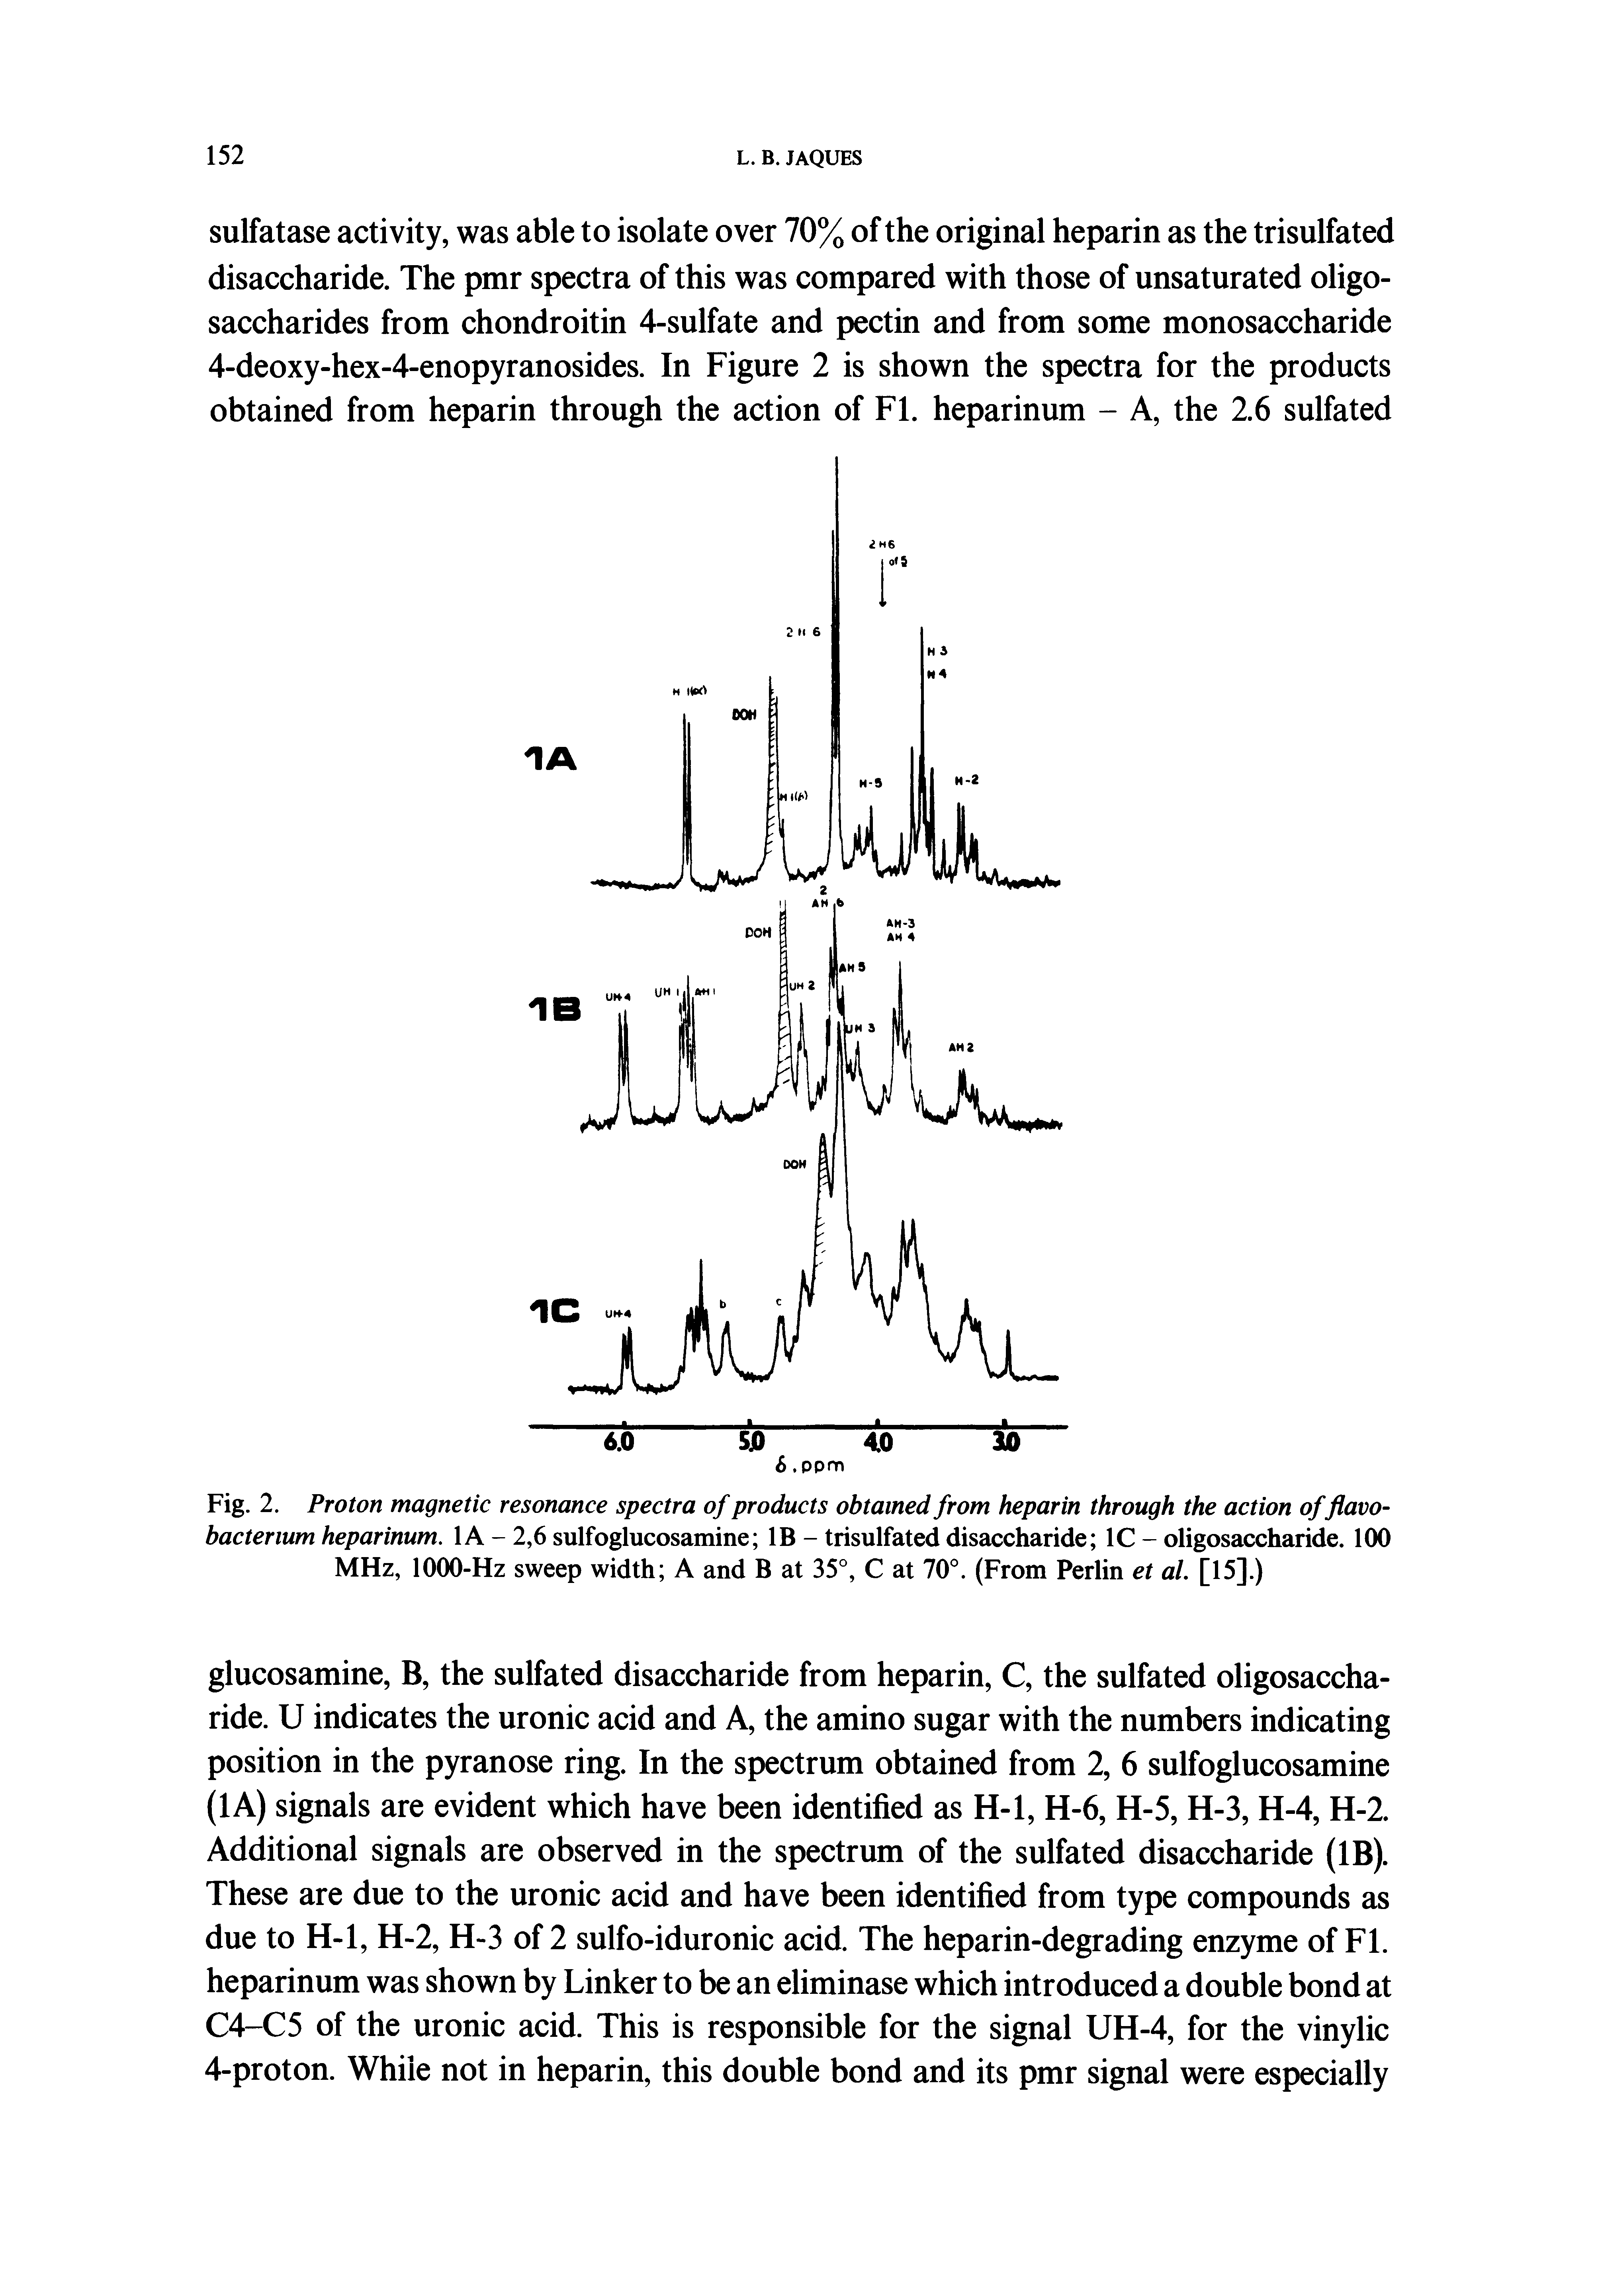 Fig. 2. Proton magnetic resonance spectra of products obtained from heparin through the action offlavo-bacterium heparinum. lA - 2,6 sulfoglucosamine IB - trisulfated disaccharide 1C - oligosaccharide. 100 MHz, 1000-Hz sweep width A and B at 35°, C at 70°. (From Perlin et al. [15].)...